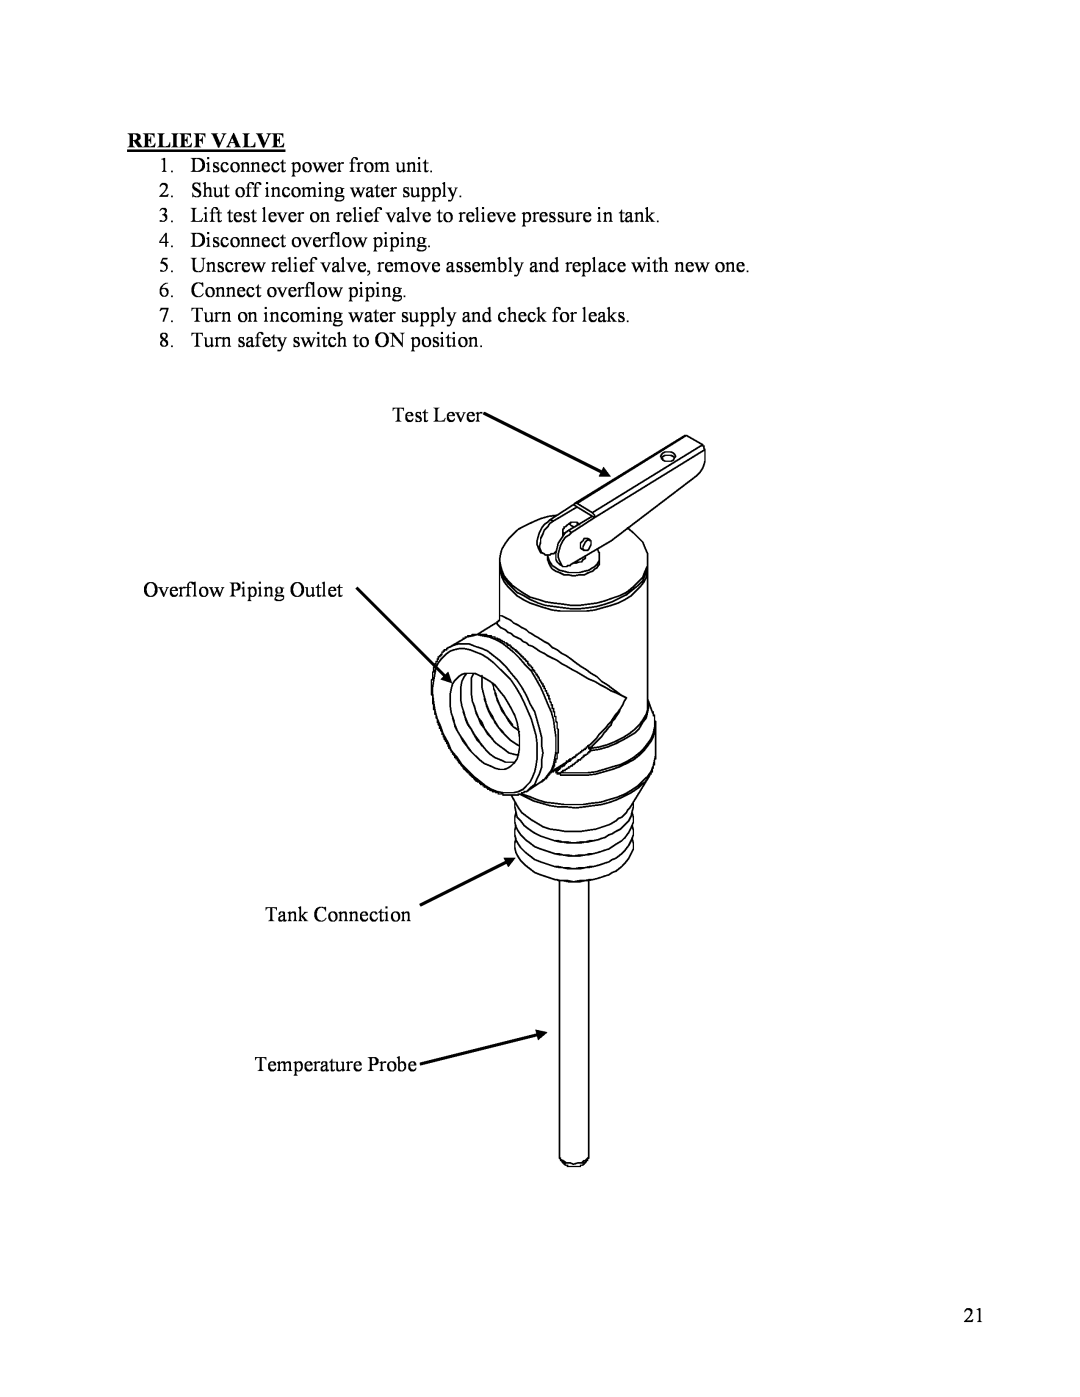 Hubbell CR manual Relief Valve 